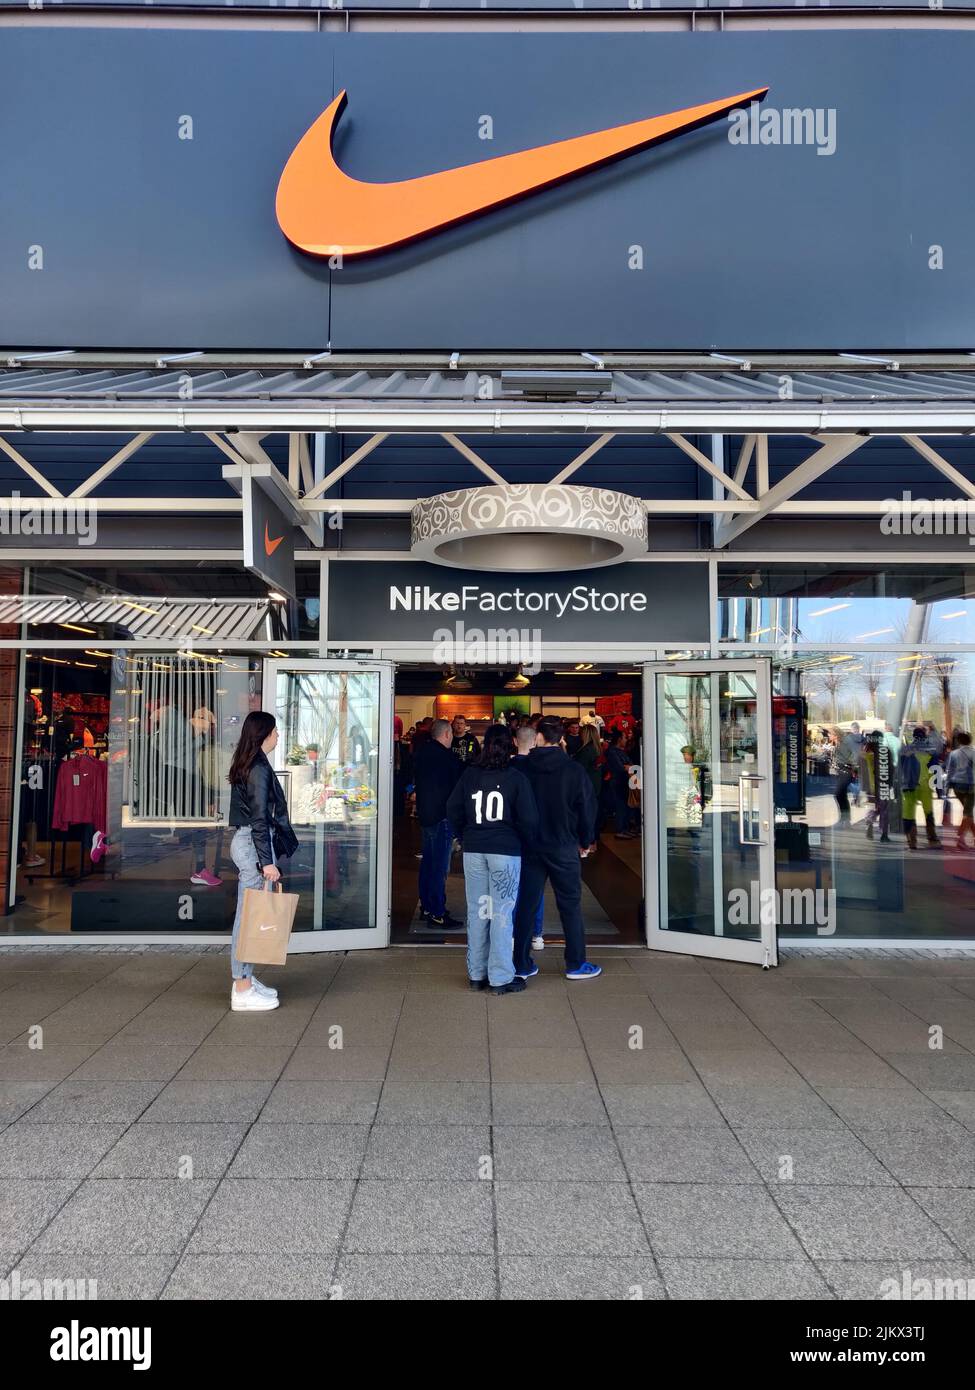 The front of a Nike Factory store in an outlet shopping center in Germany Stock Photo